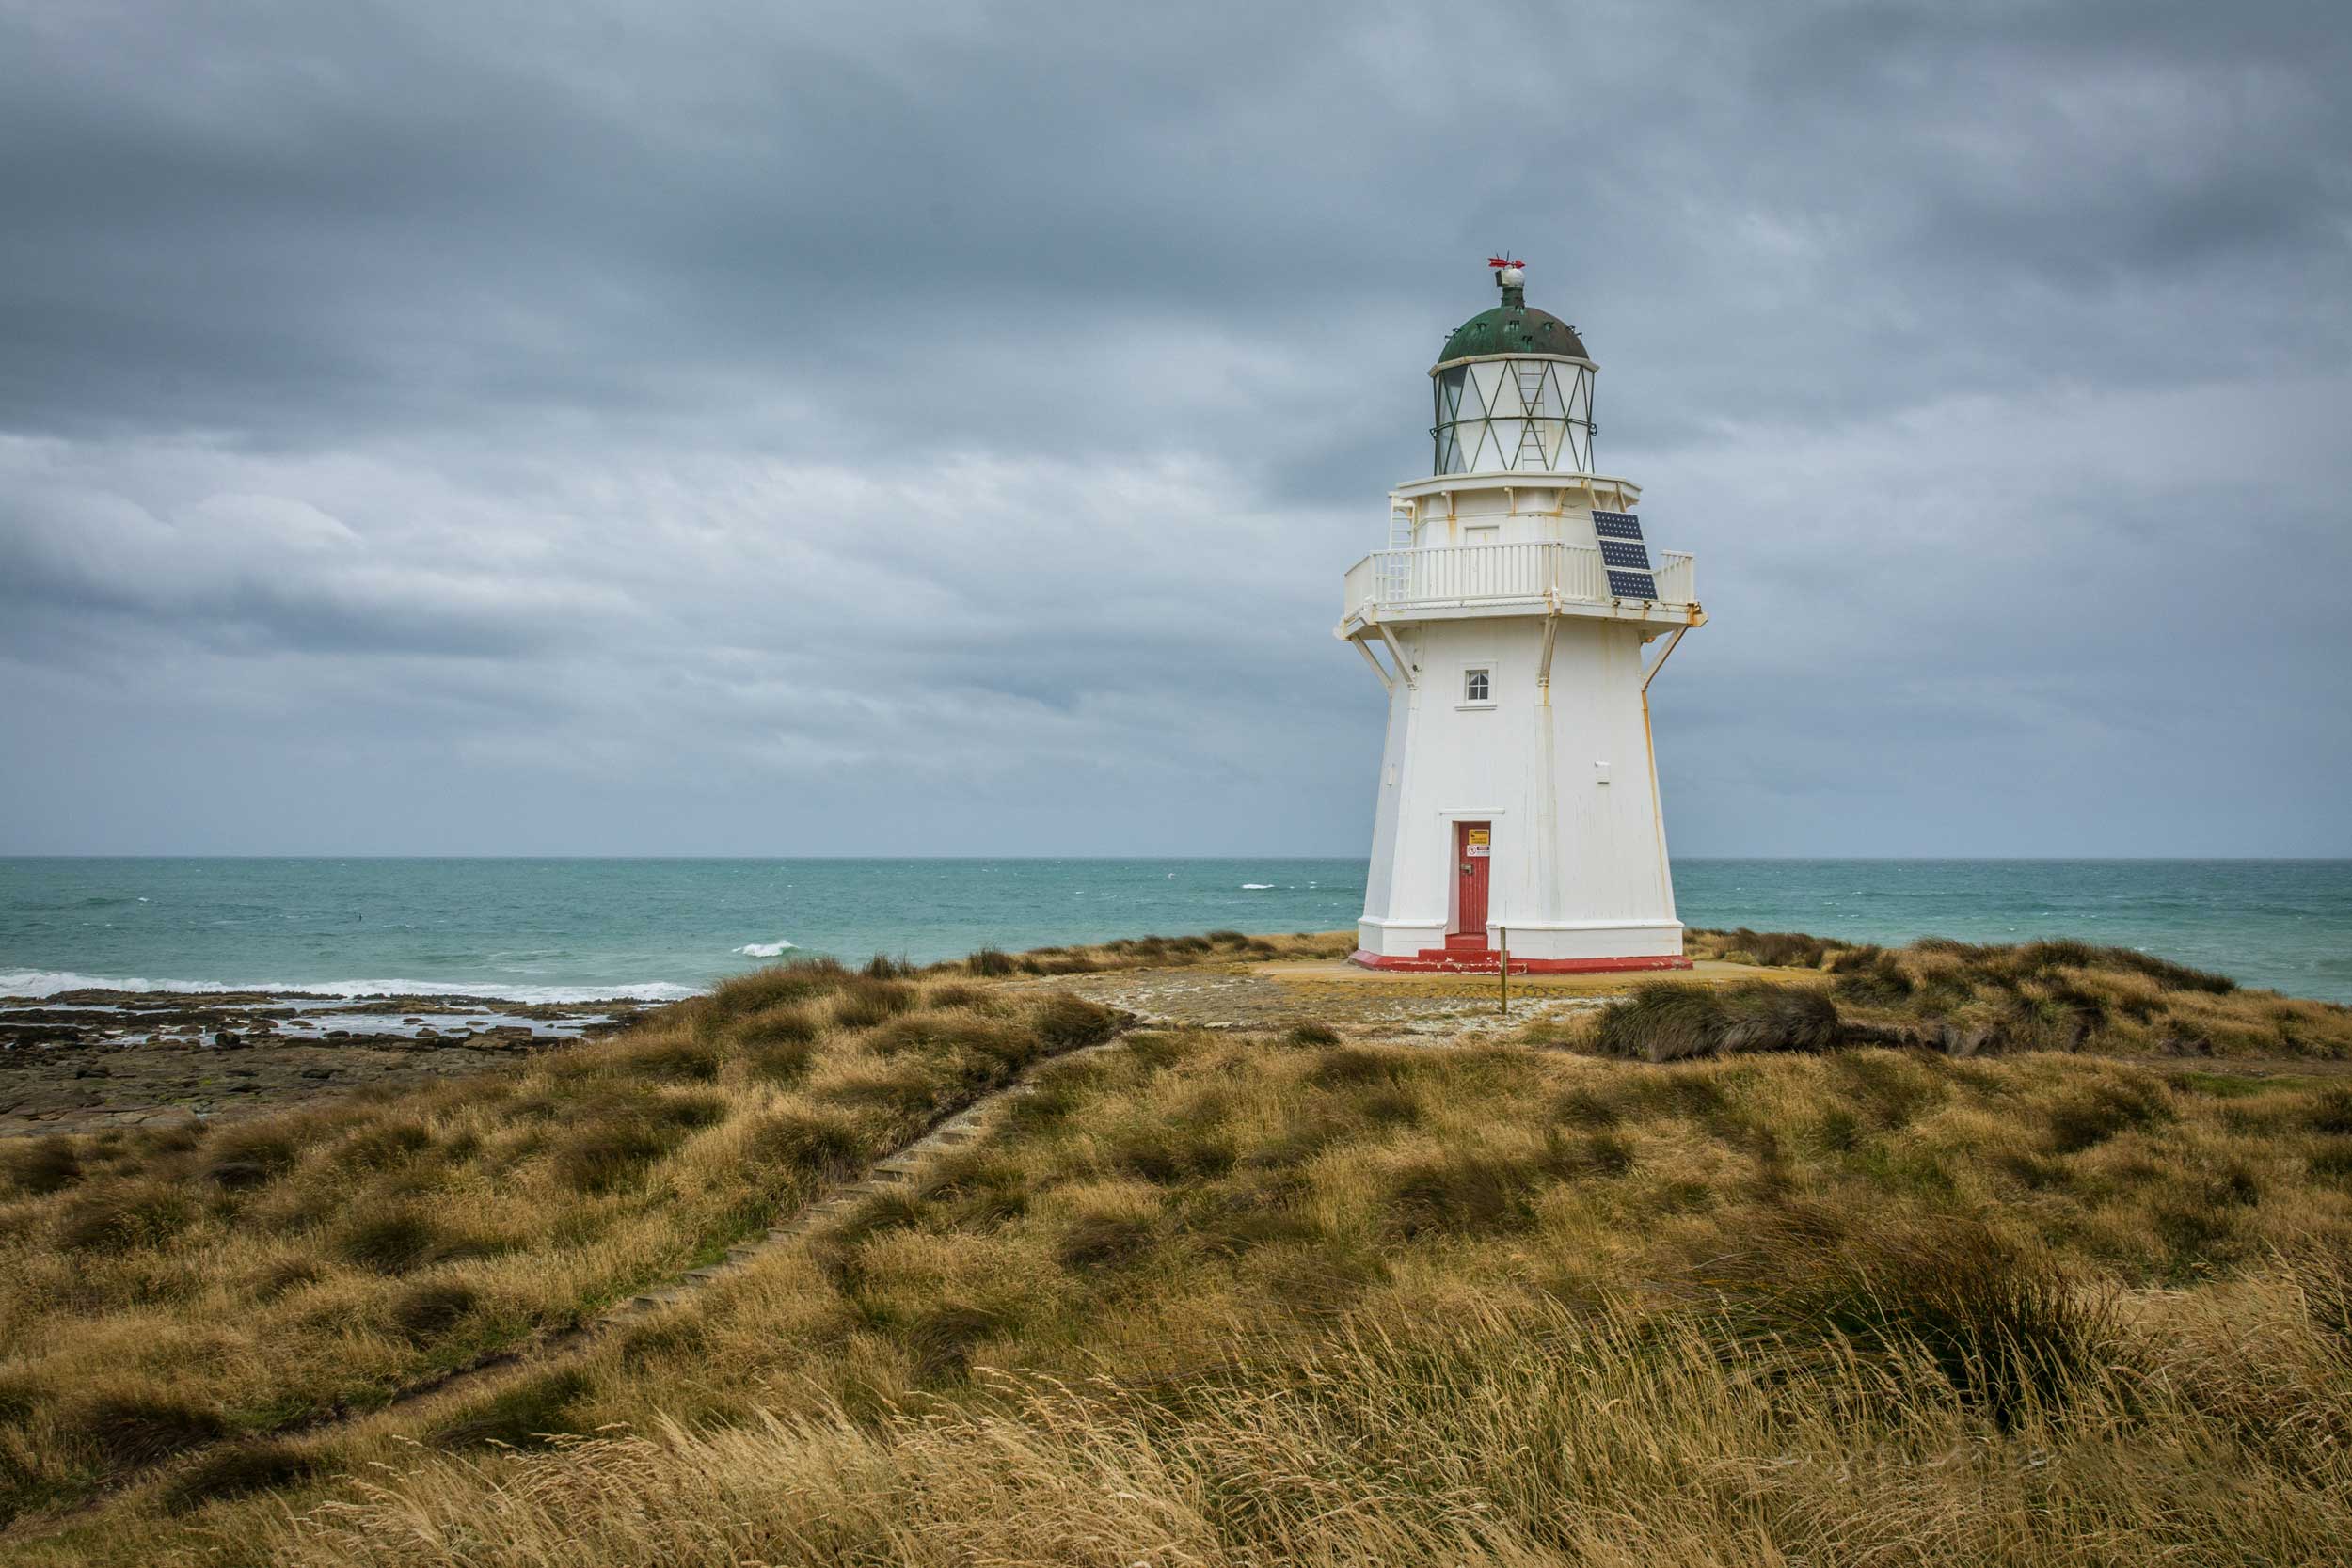 White lighthouse against a dark sky with sea visible in the background